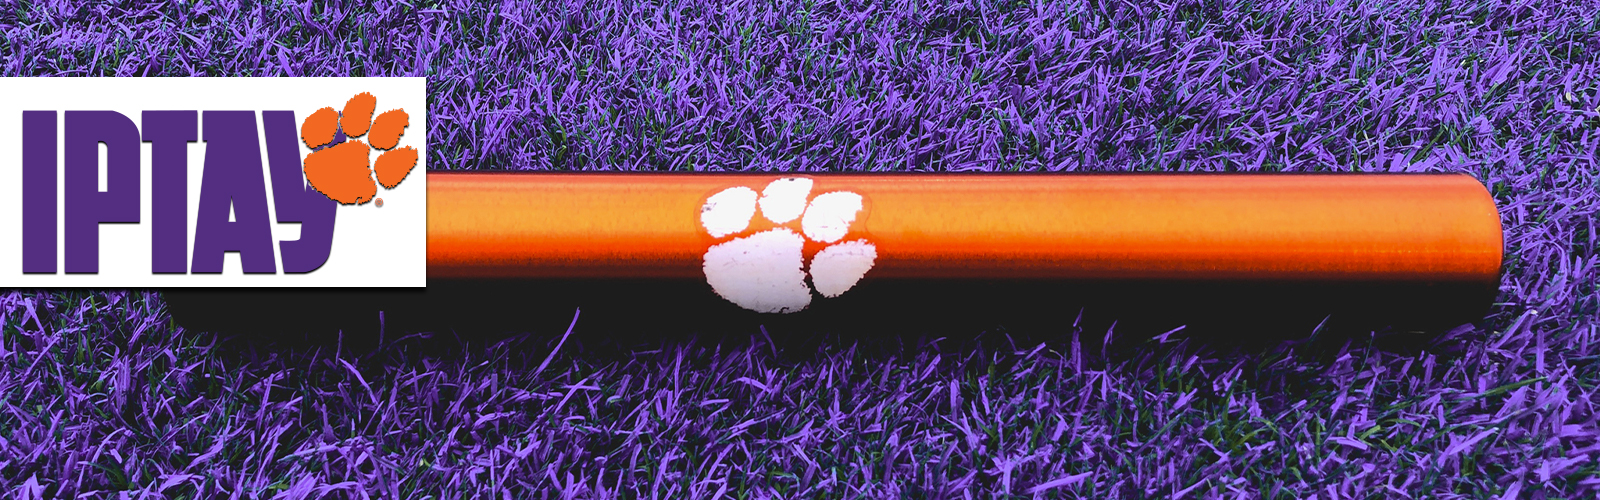 IPTAY Logo and Track and Field